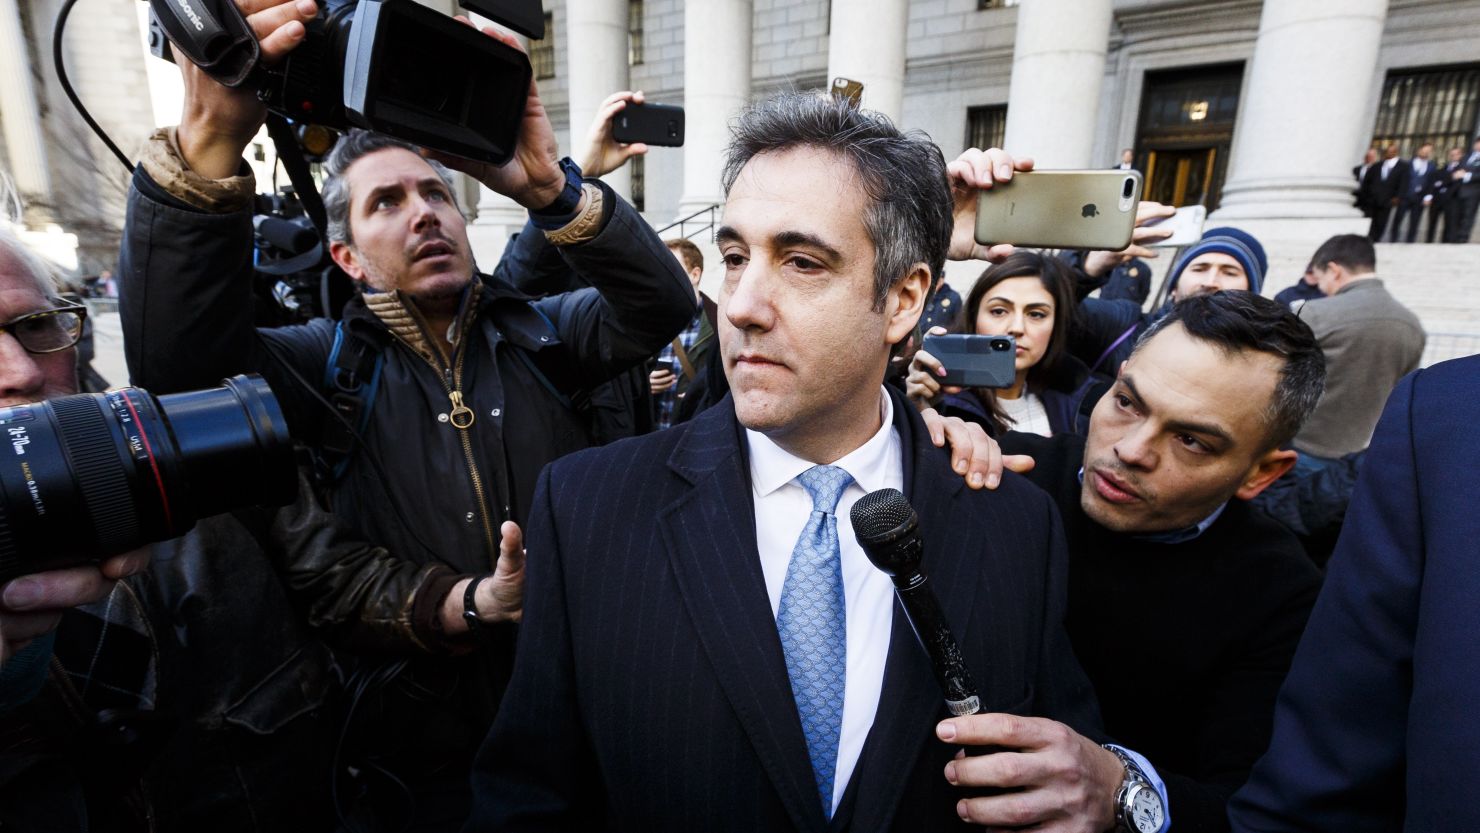 Michael Cohen, US President Donald Trump's former personal lawyer, leaves federal court after pleading guilty to charges related to lying to congress in New York, New York, USA, on 29 November 2018.